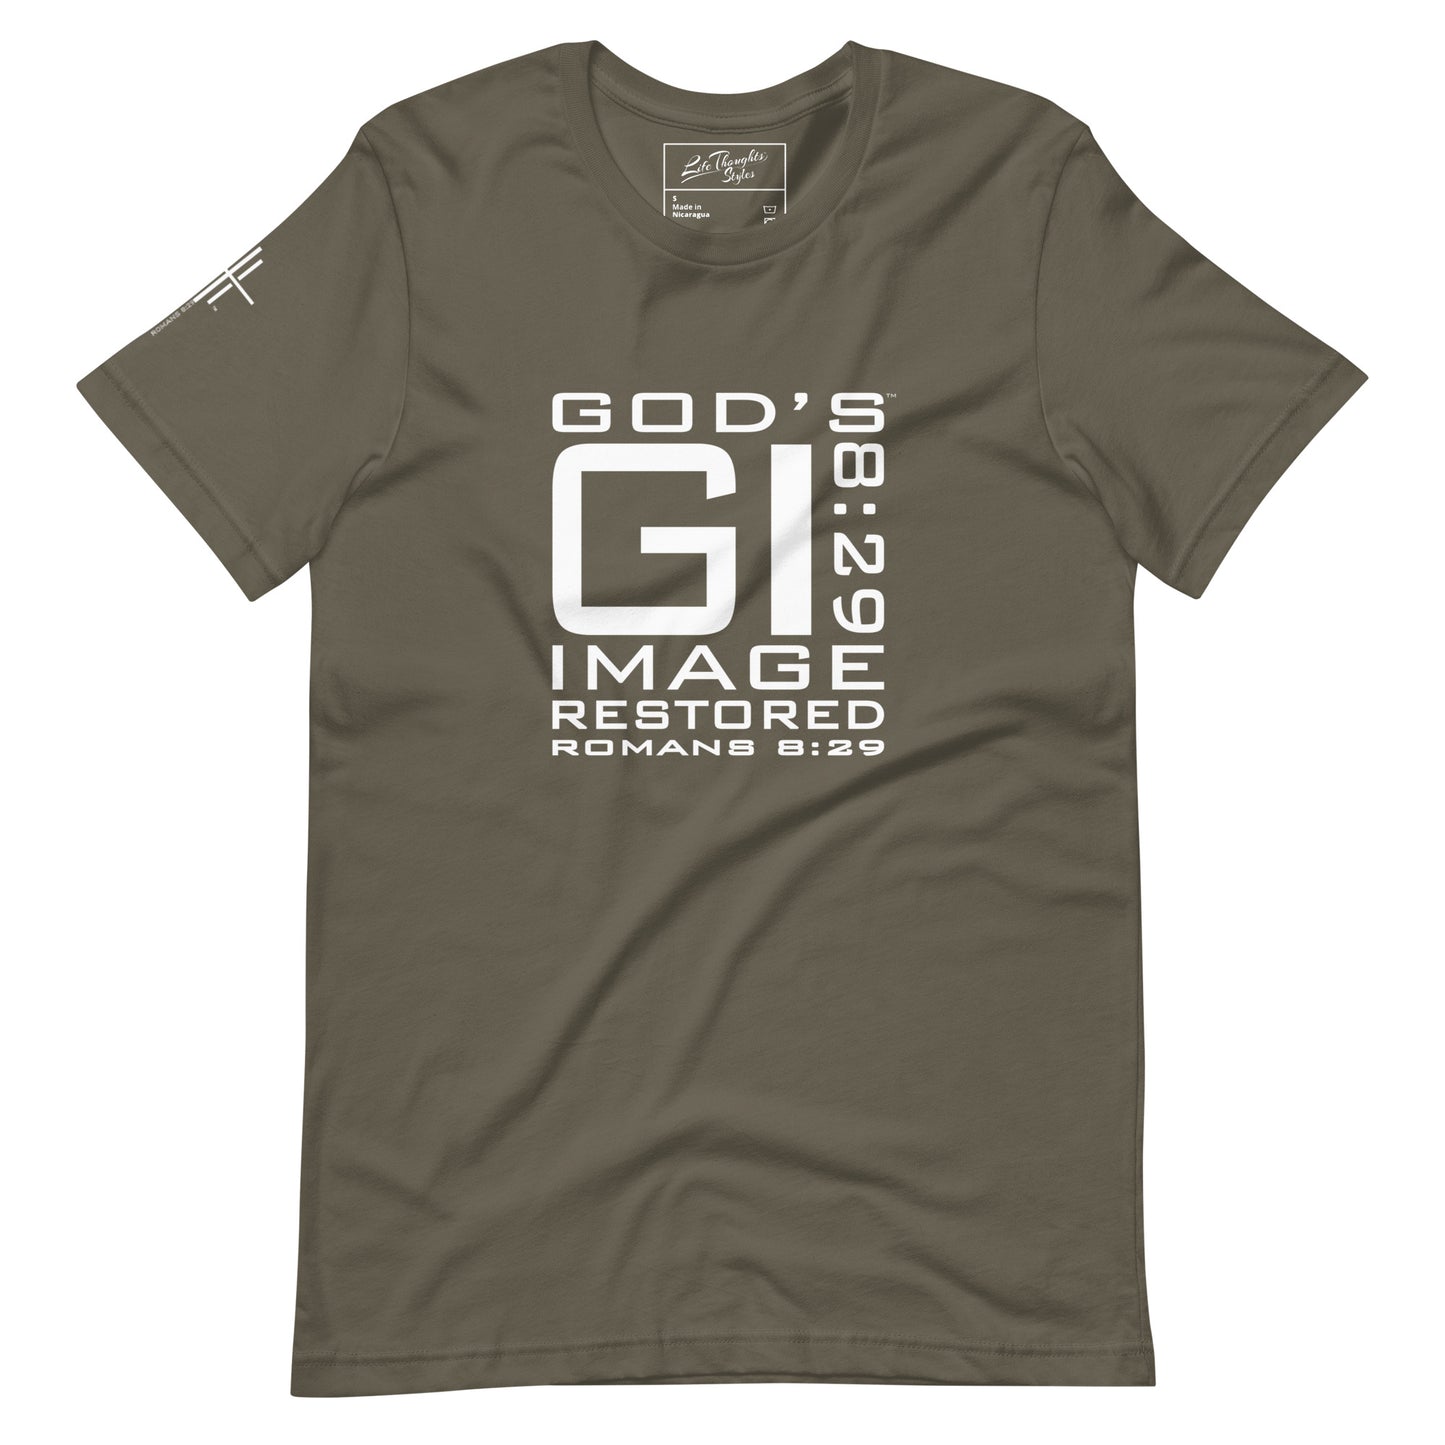 GI 8 29 God's Image Restored square tee army green front